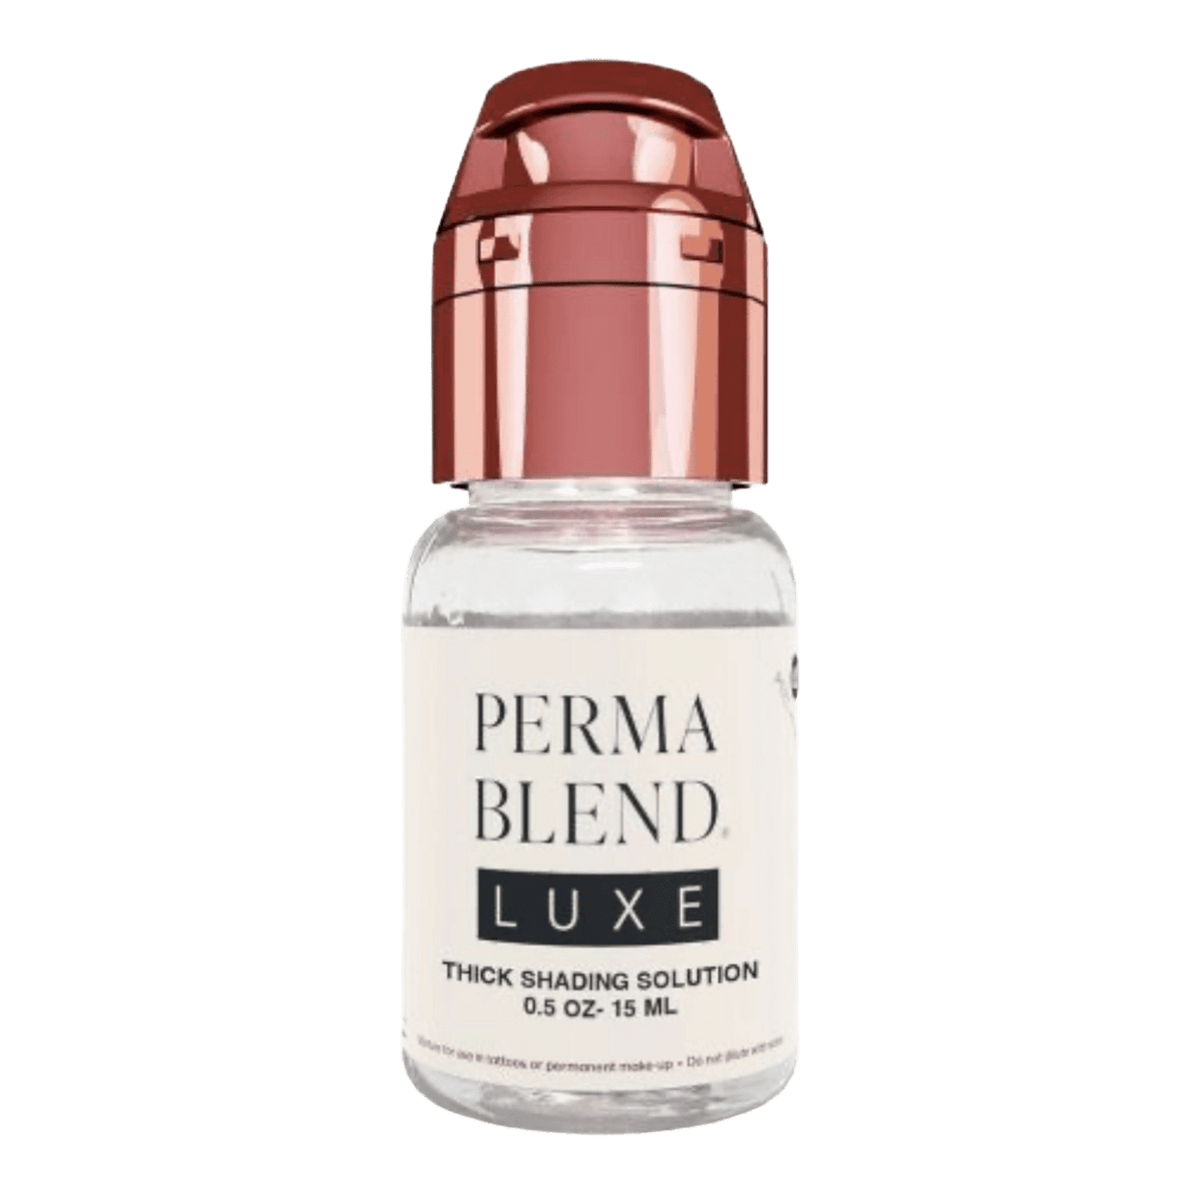 Perma Blend Luxe Thick Shading Solution